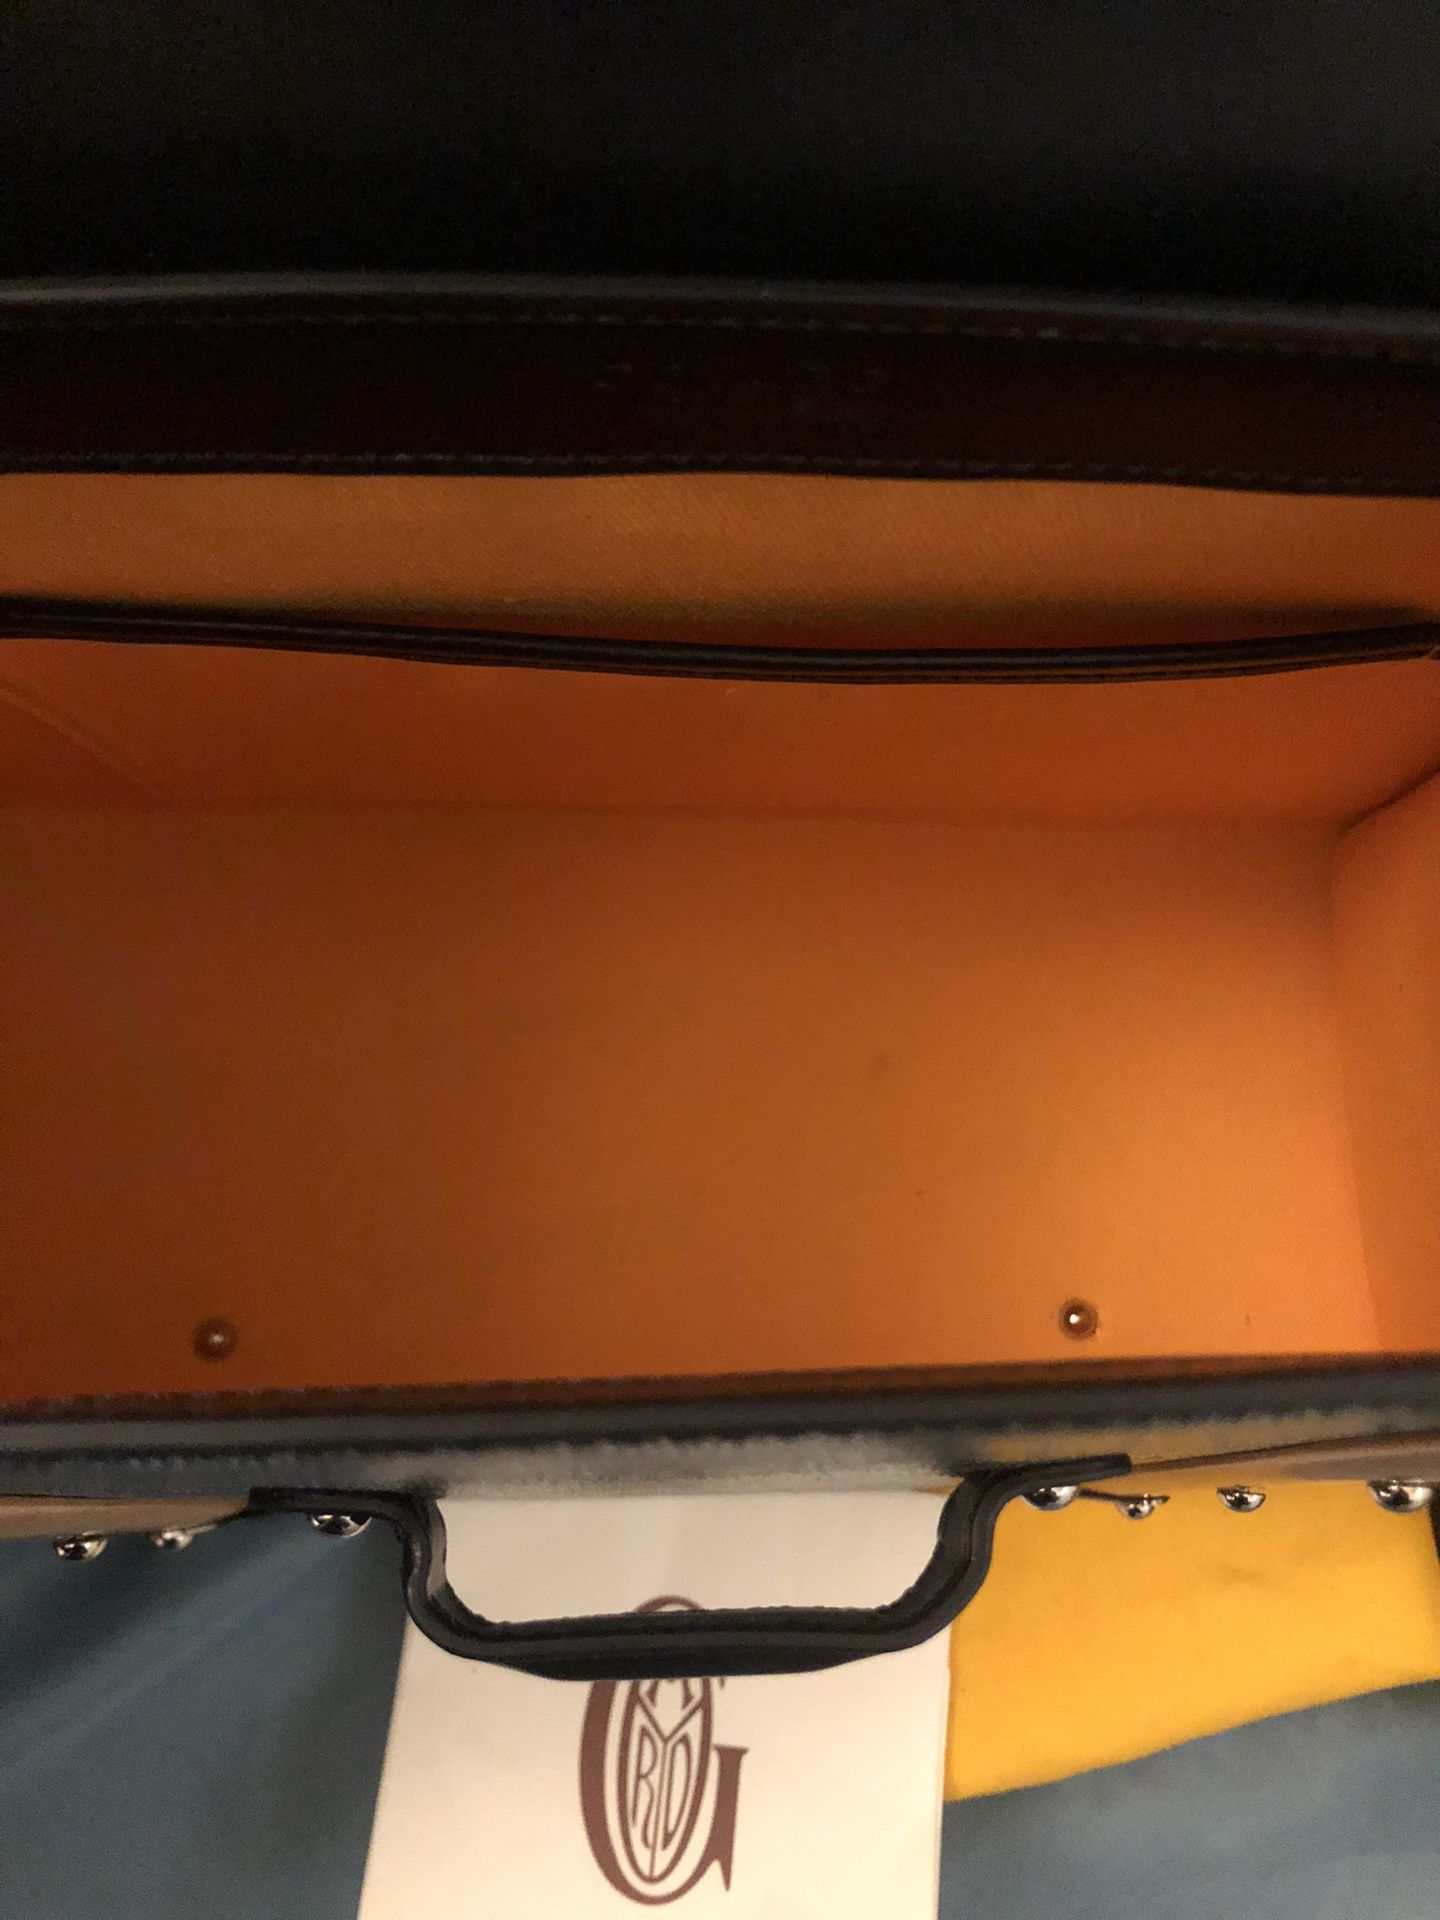 Goyard Saint Louis Tote for Sale in Cleveland, OH - OfferUp